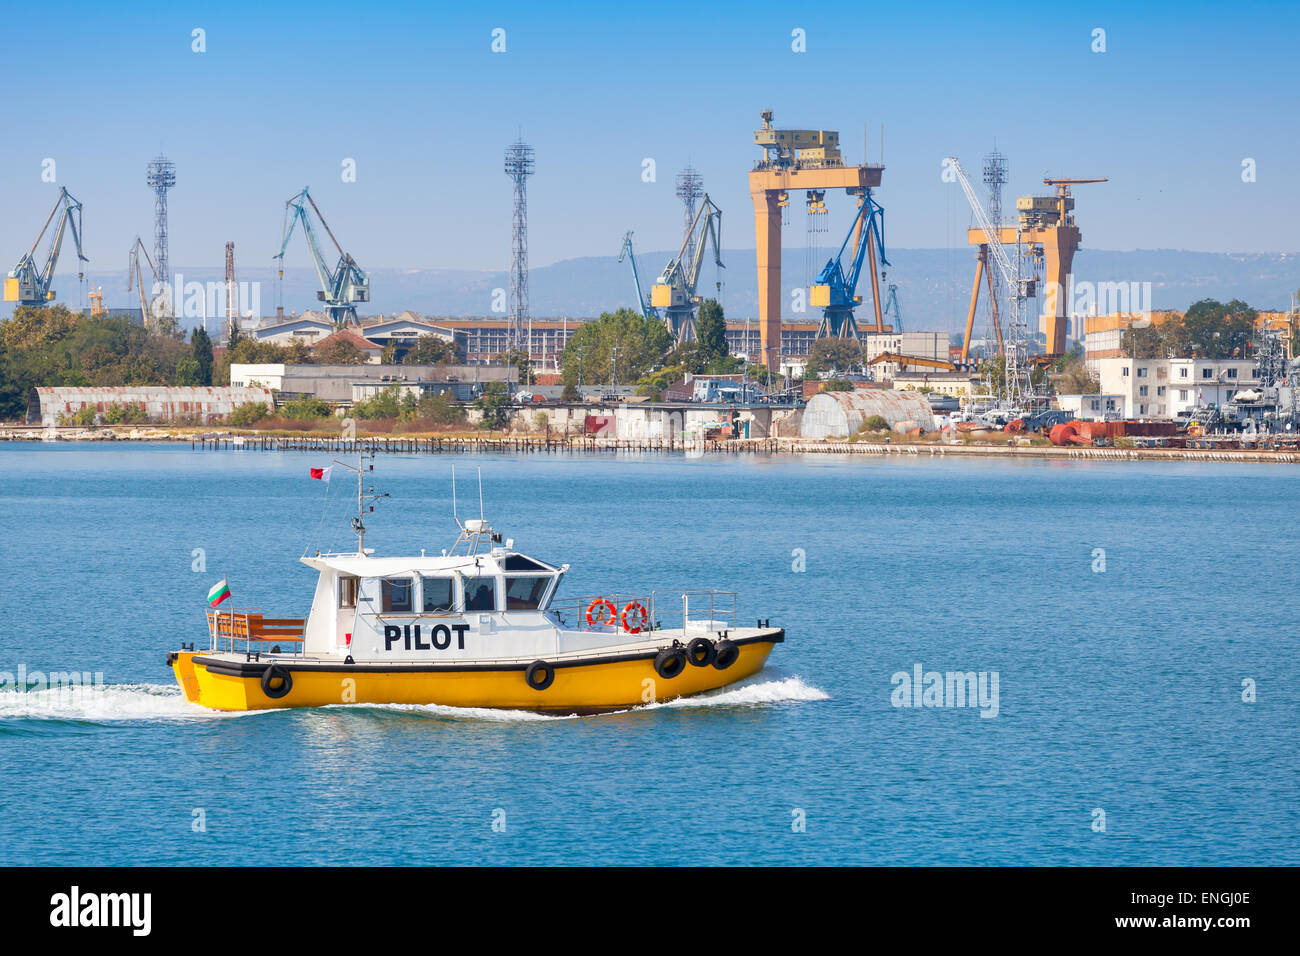 Yellow and white small pilot boat enters the port of Varna, Bulgaria Stock Photo